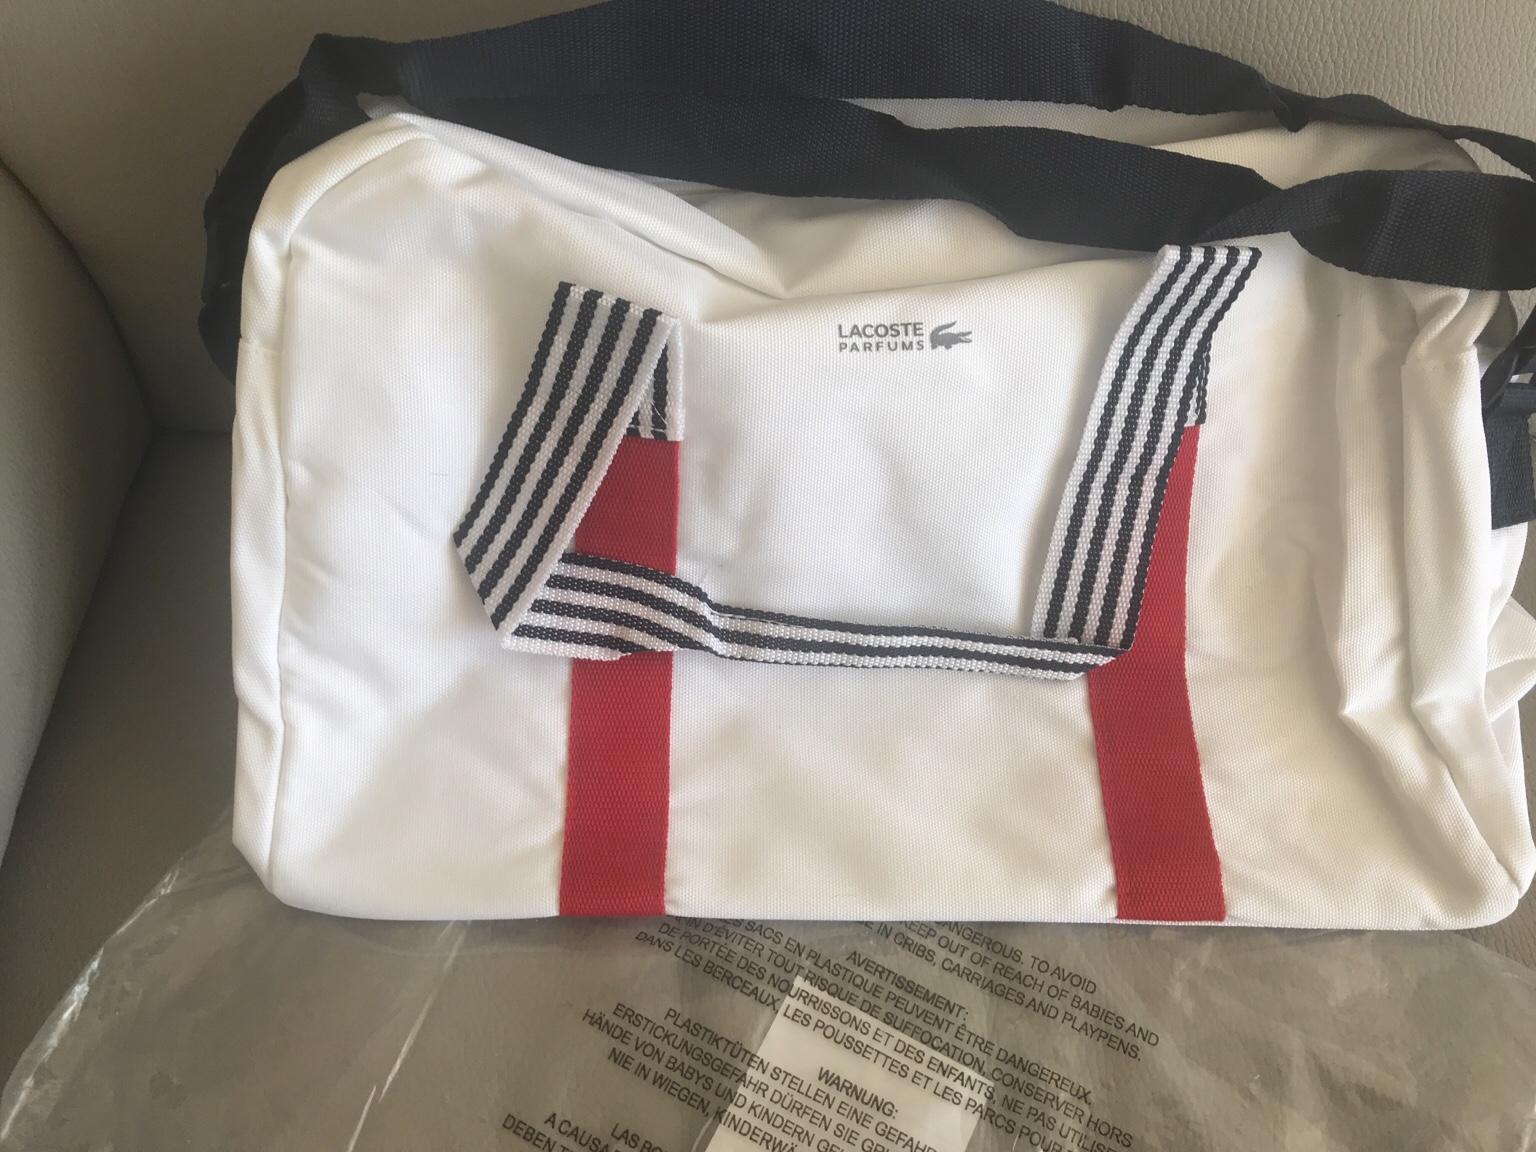 lacoste french panache bag